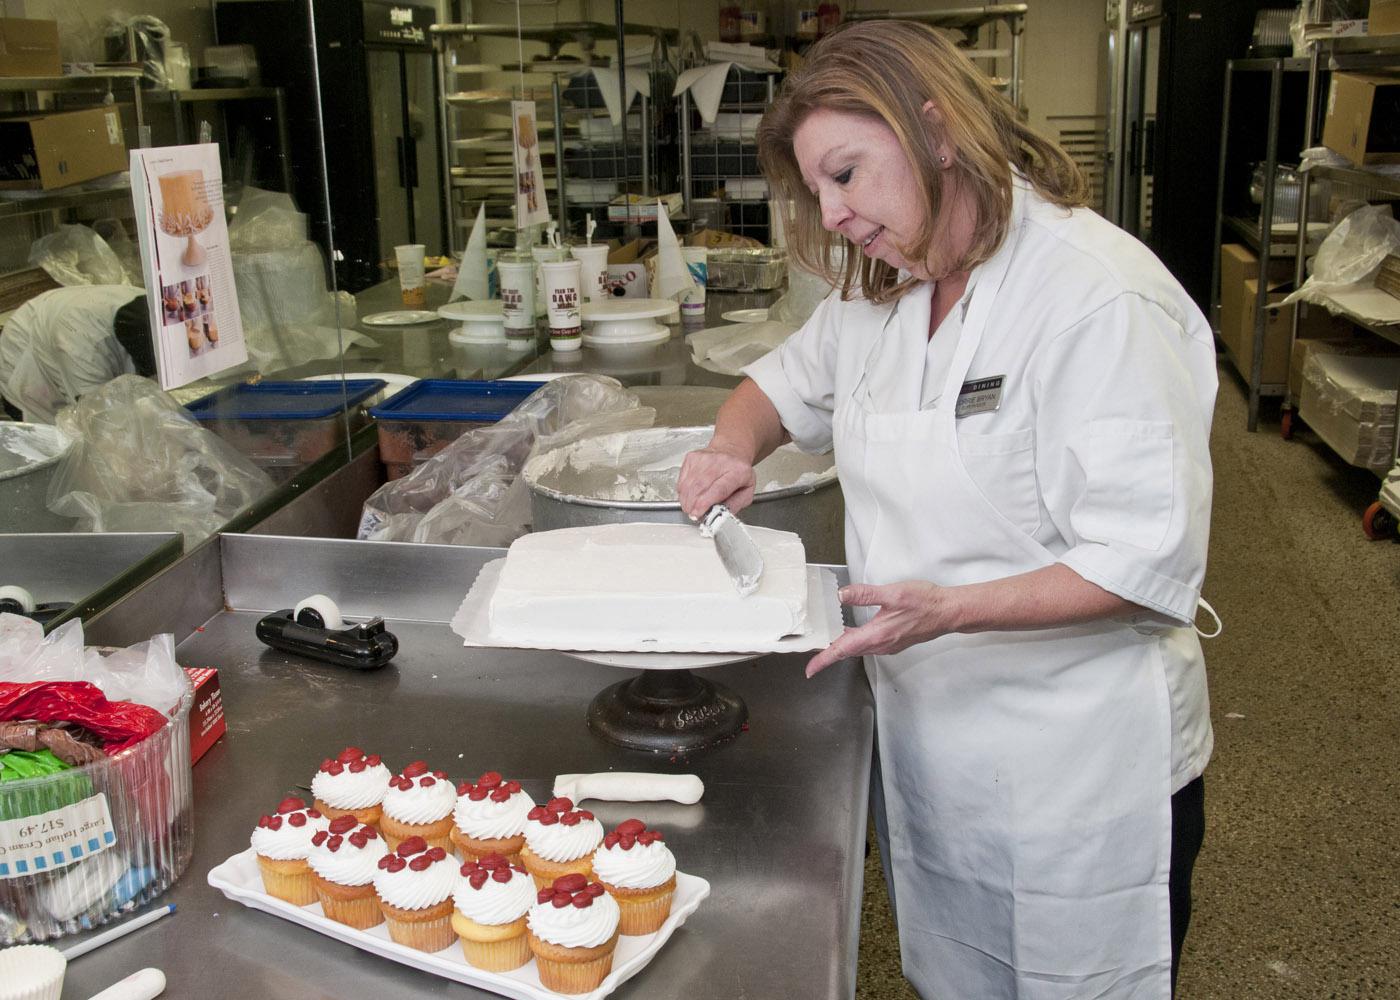 Lorrie Bryan, cake decorator at the Mississippi State University Fountain Bakery, creates Bully's pawprints to cupcakes after whipping up a batch of maroon frosting. (Photo by Scott Corey)